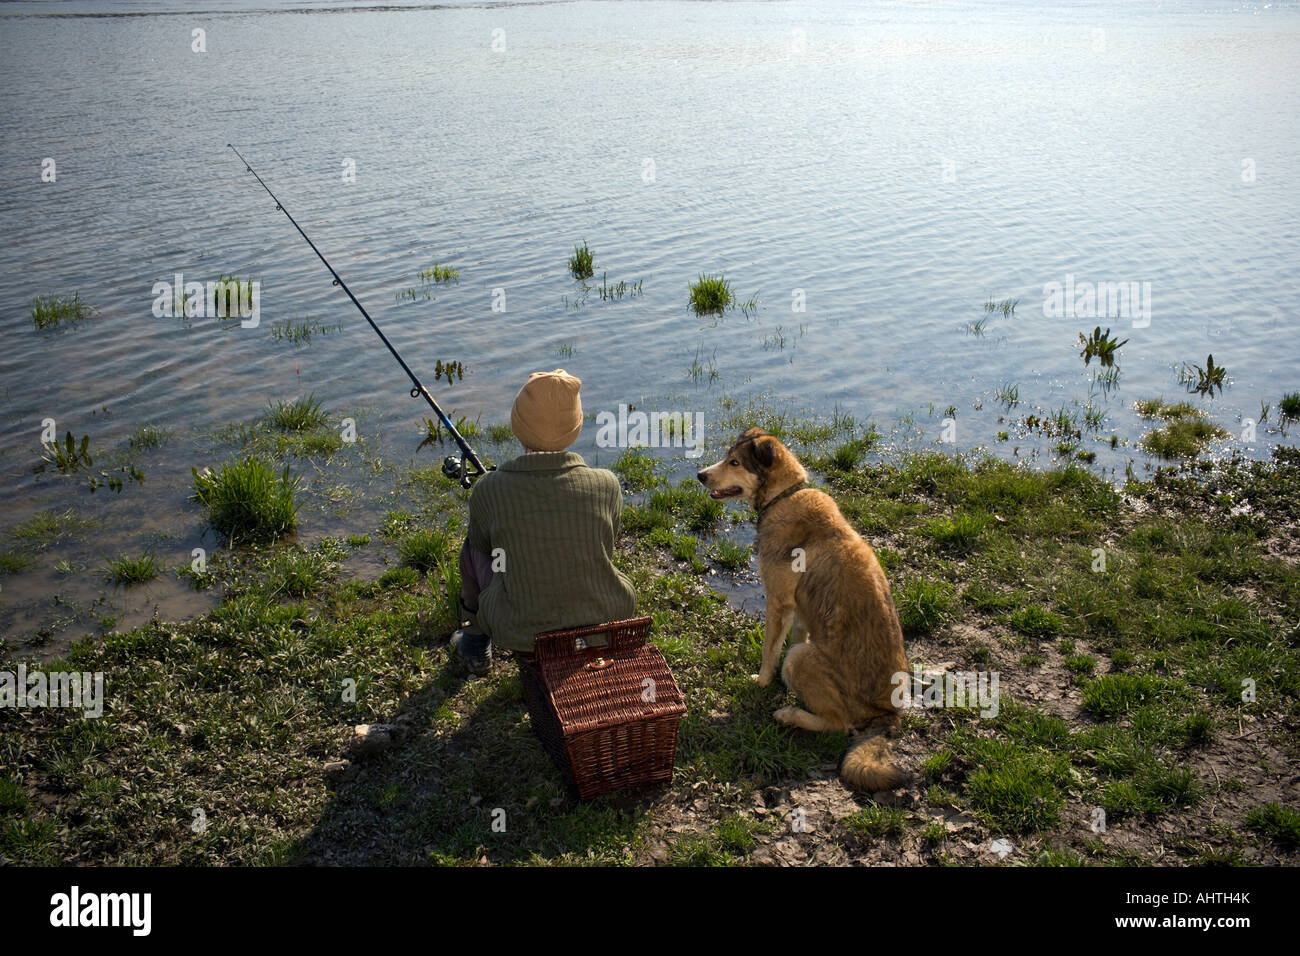 Boy (12-14) fishing by river with pet dog, rear view Stock Photo